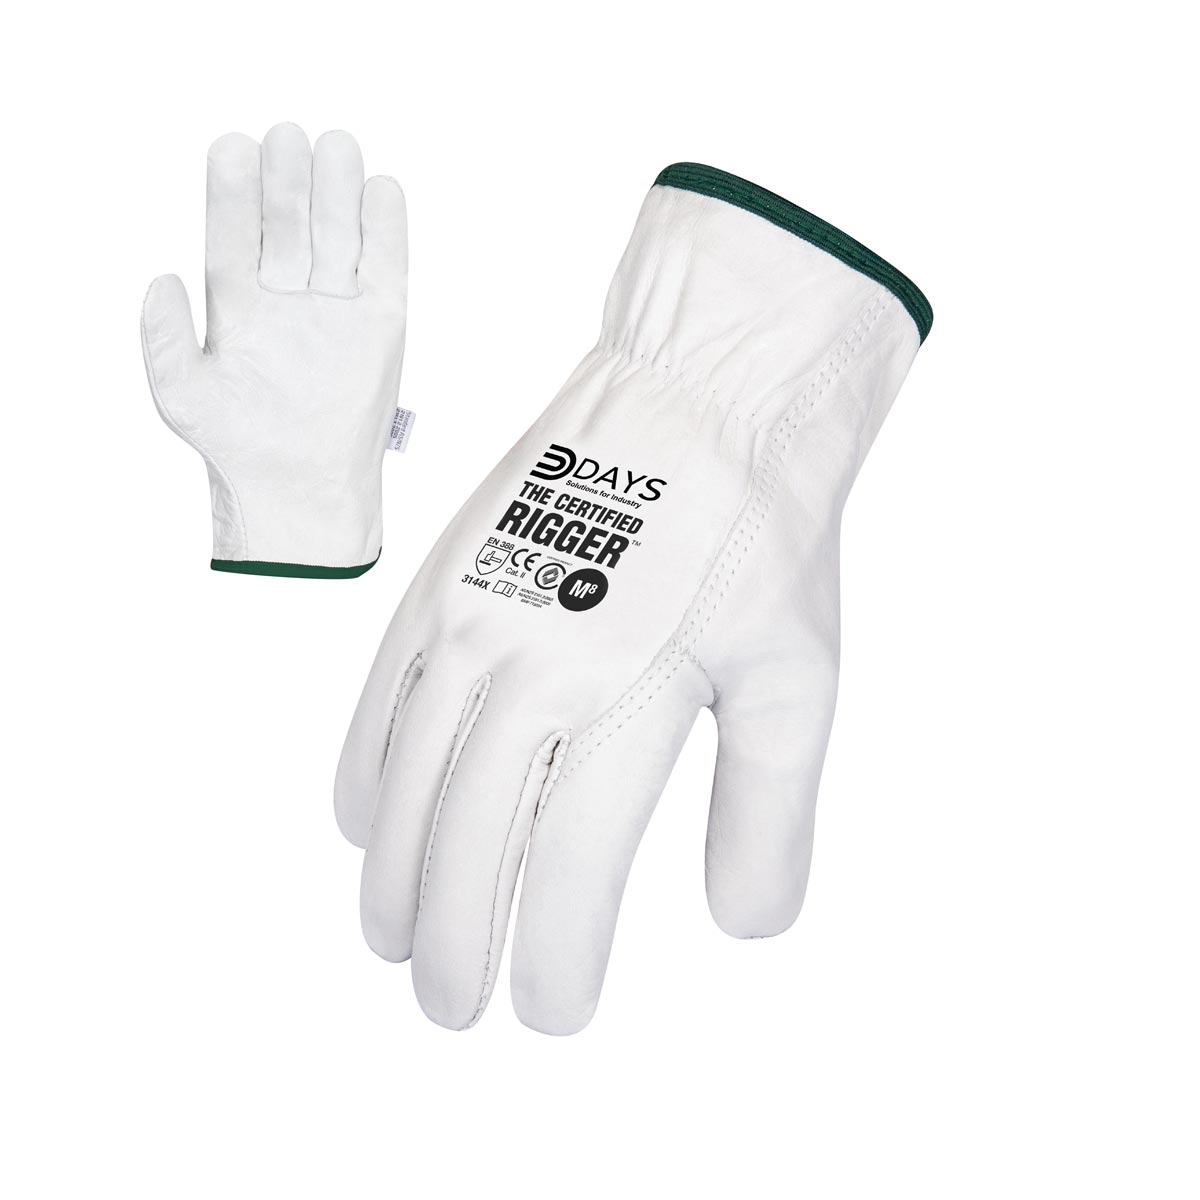 F360 GWORX600 The Certified Rigger Glove